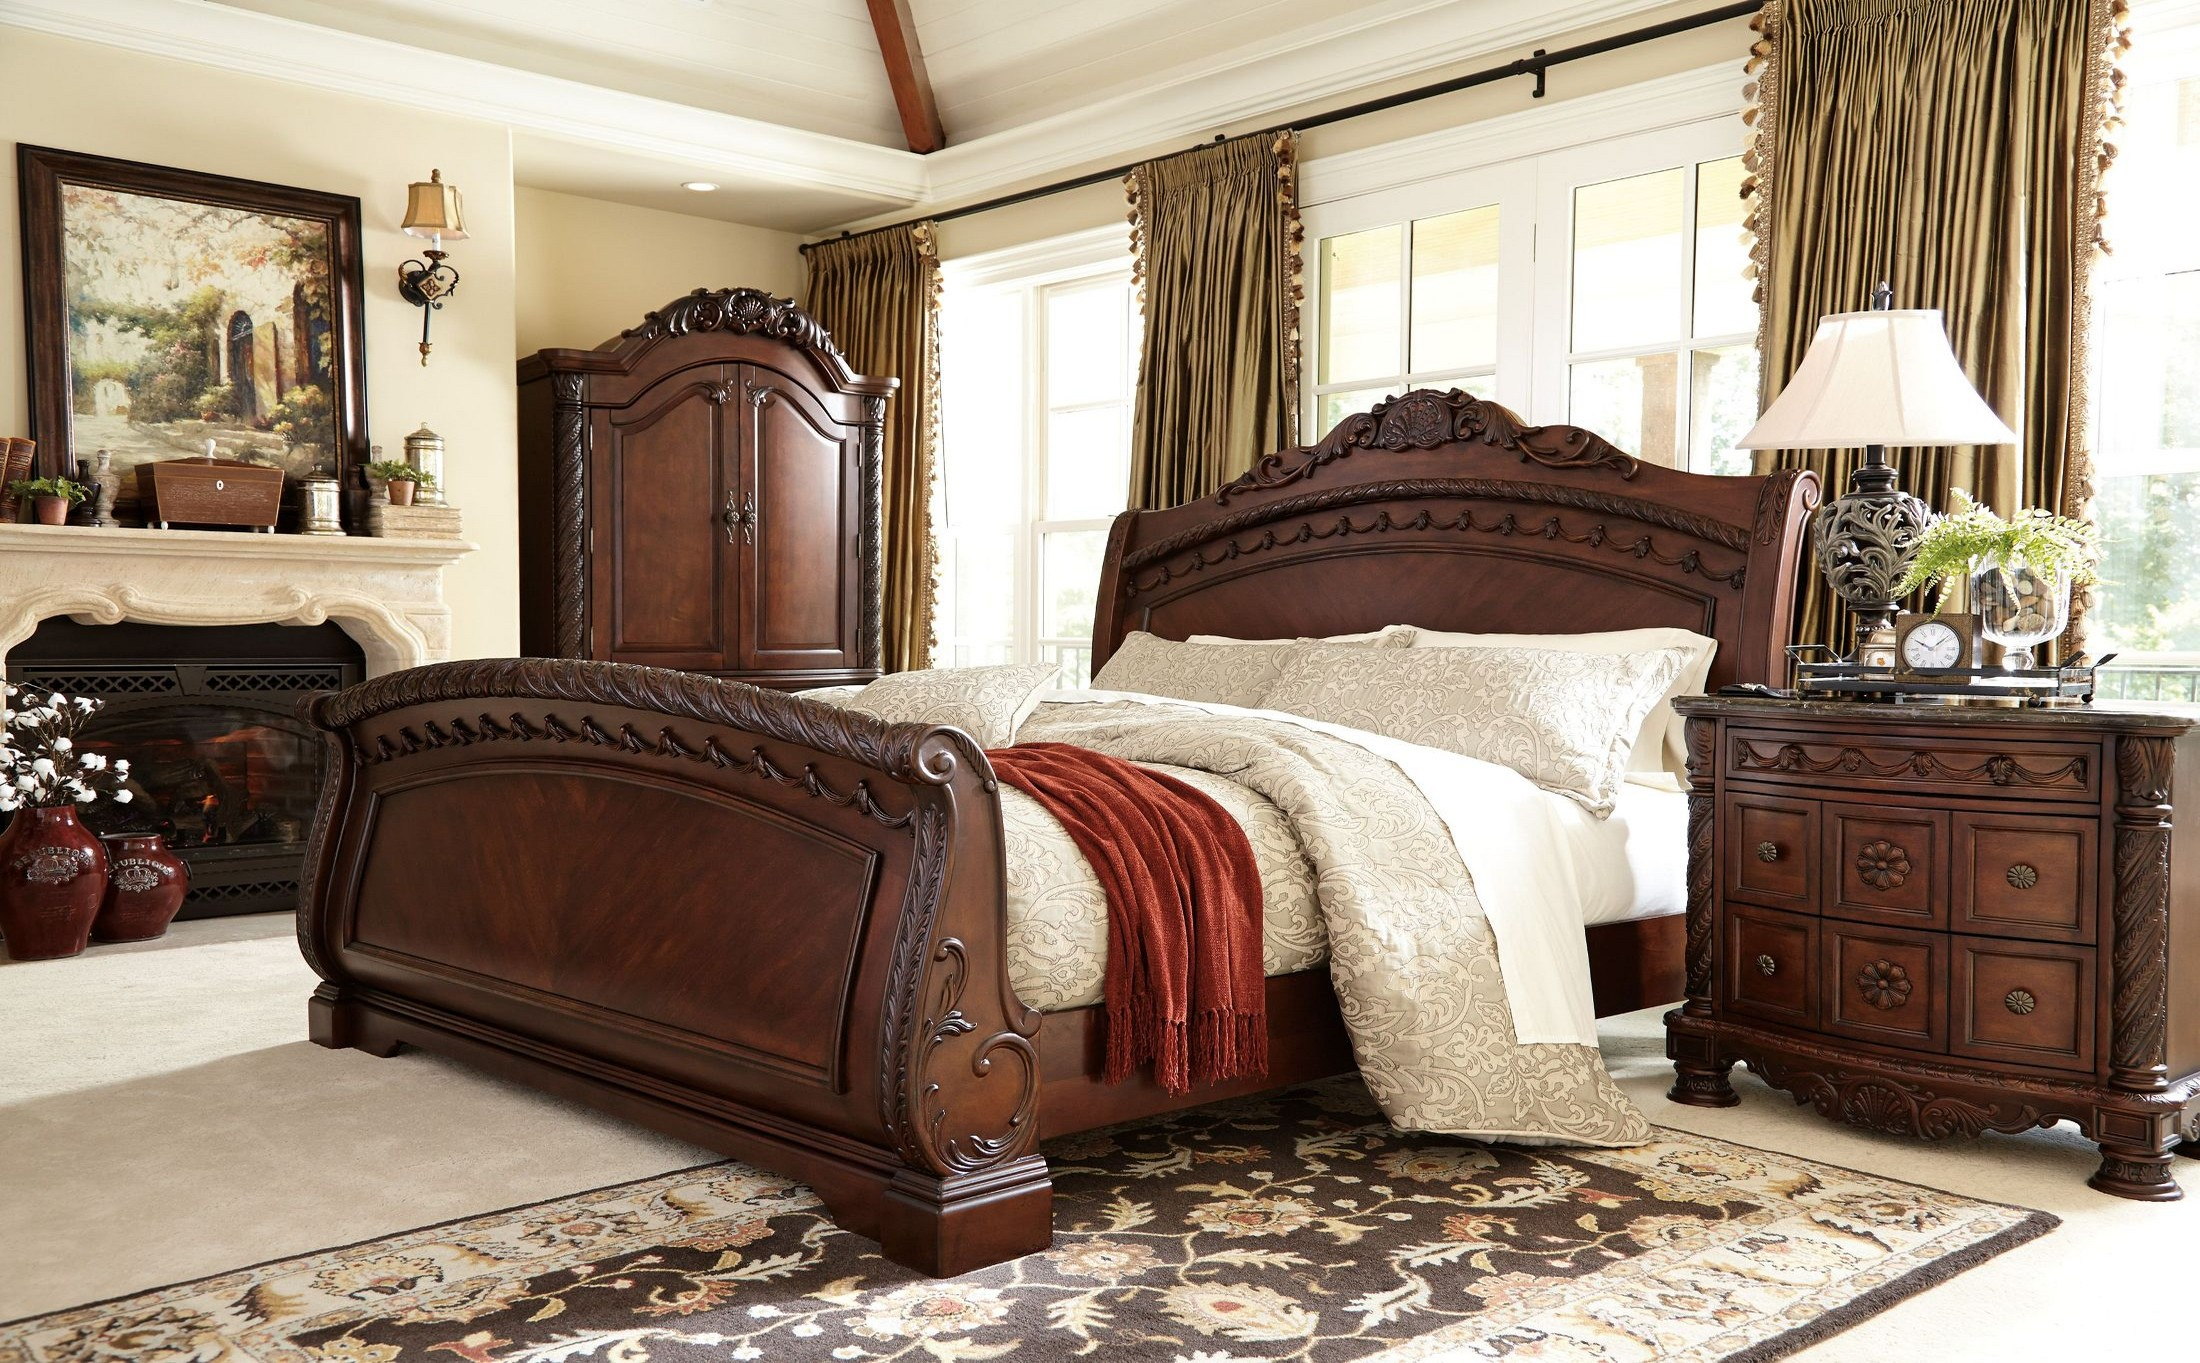 North Shore Sleigh Bedroom Set in size 2200 X 1363